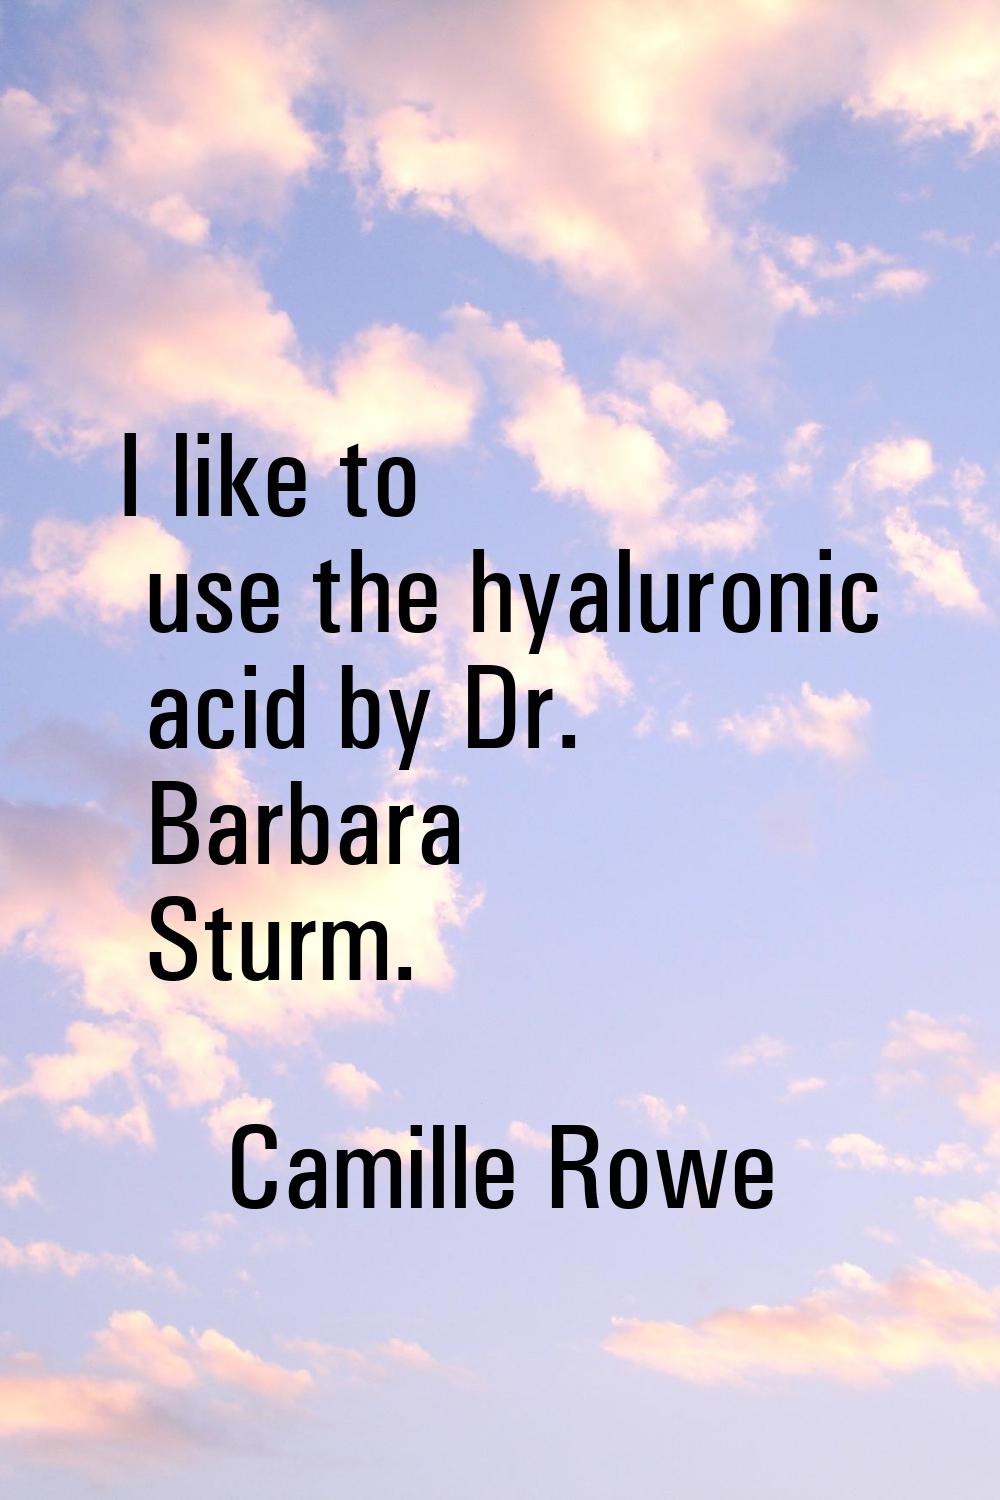 I like to use the hyaluronic acid by Dr. Barbara Sturm.